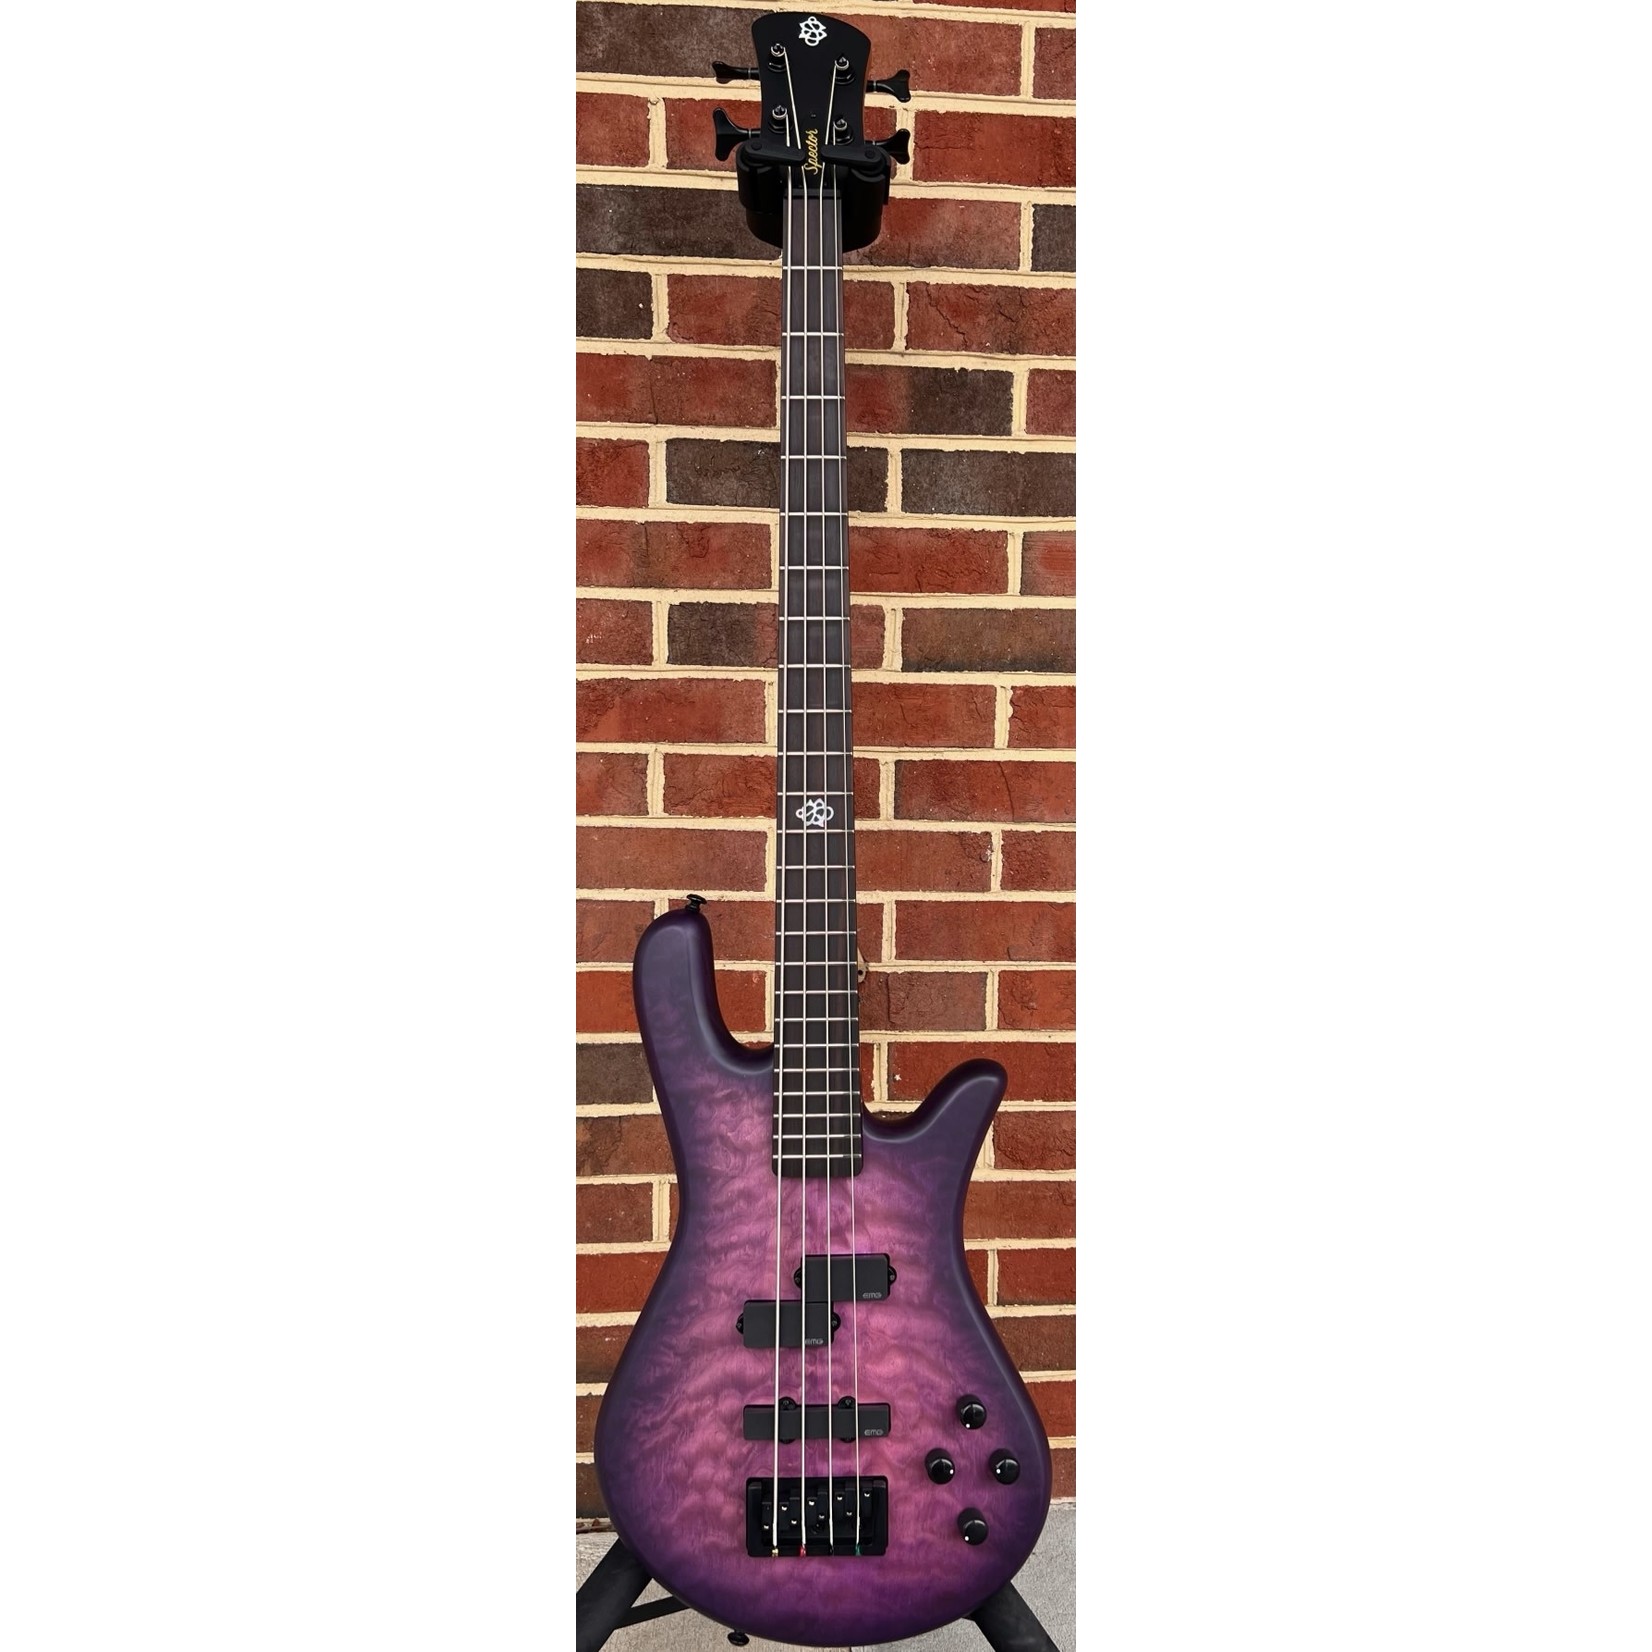 Spector Spector NS Pulse II 4-String, Ultra Violet Matte, Quilted Maple Top, Swamp Ash Body, Roasted Maple Neck, Macassar Ebony Fretboard, SN# W211438